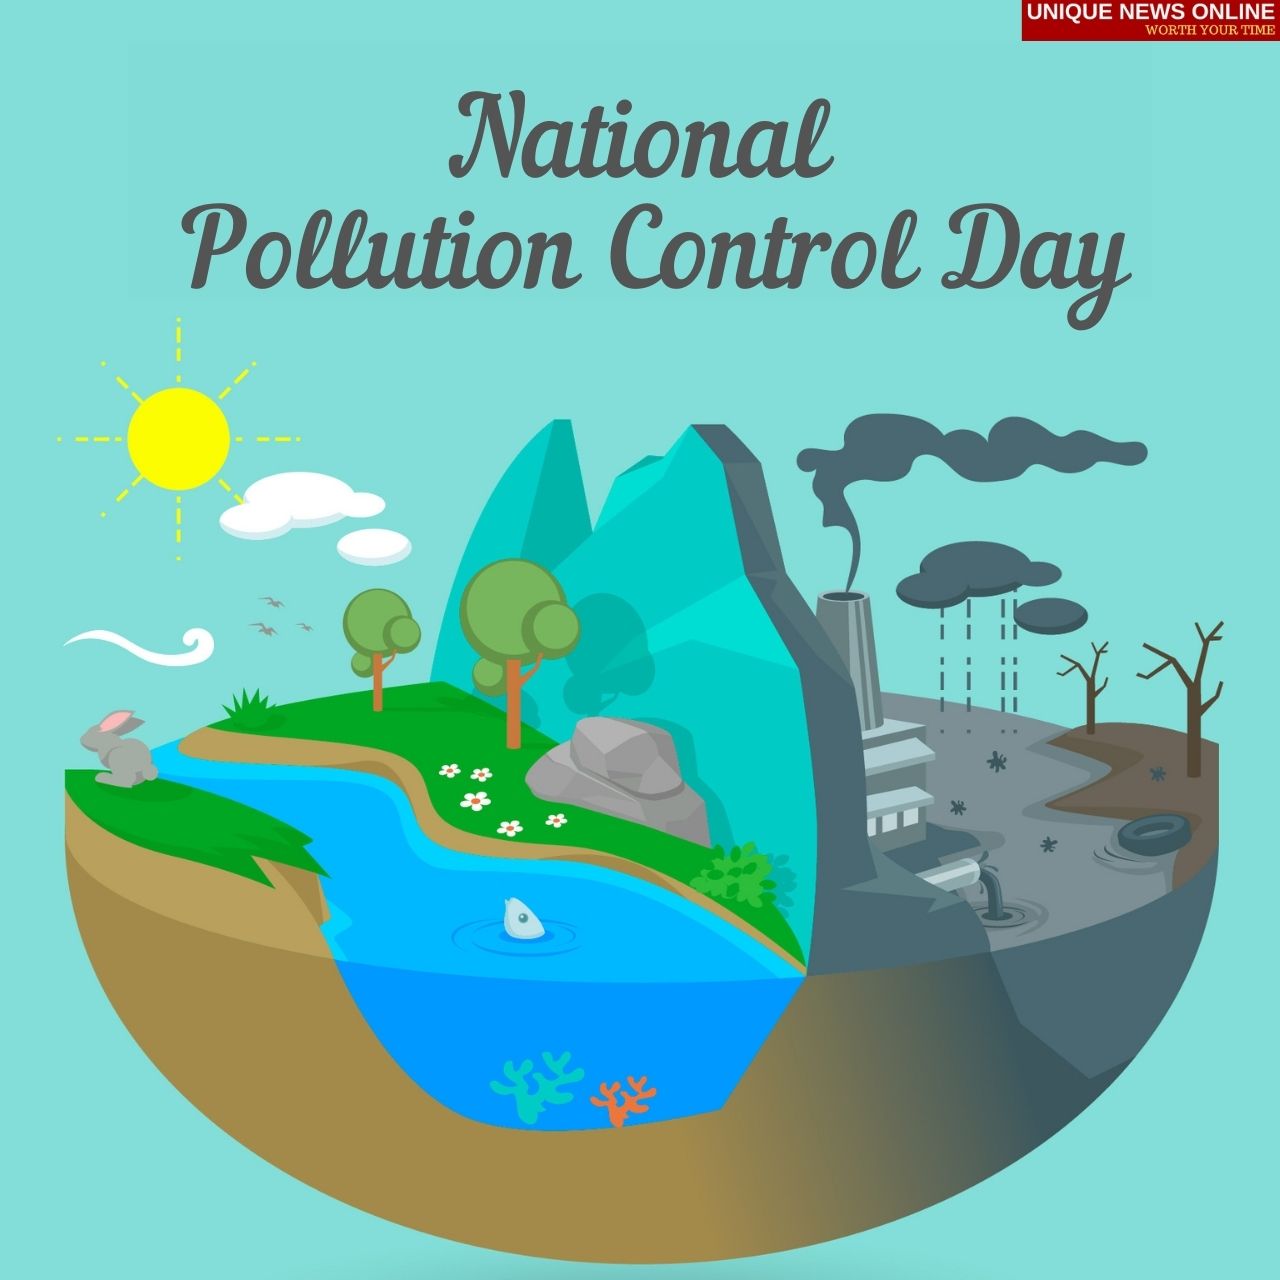 National Pollution Control Day 2021 Poster, Quotes, HD Images, Messages, Slogans, and Banners to create awareness